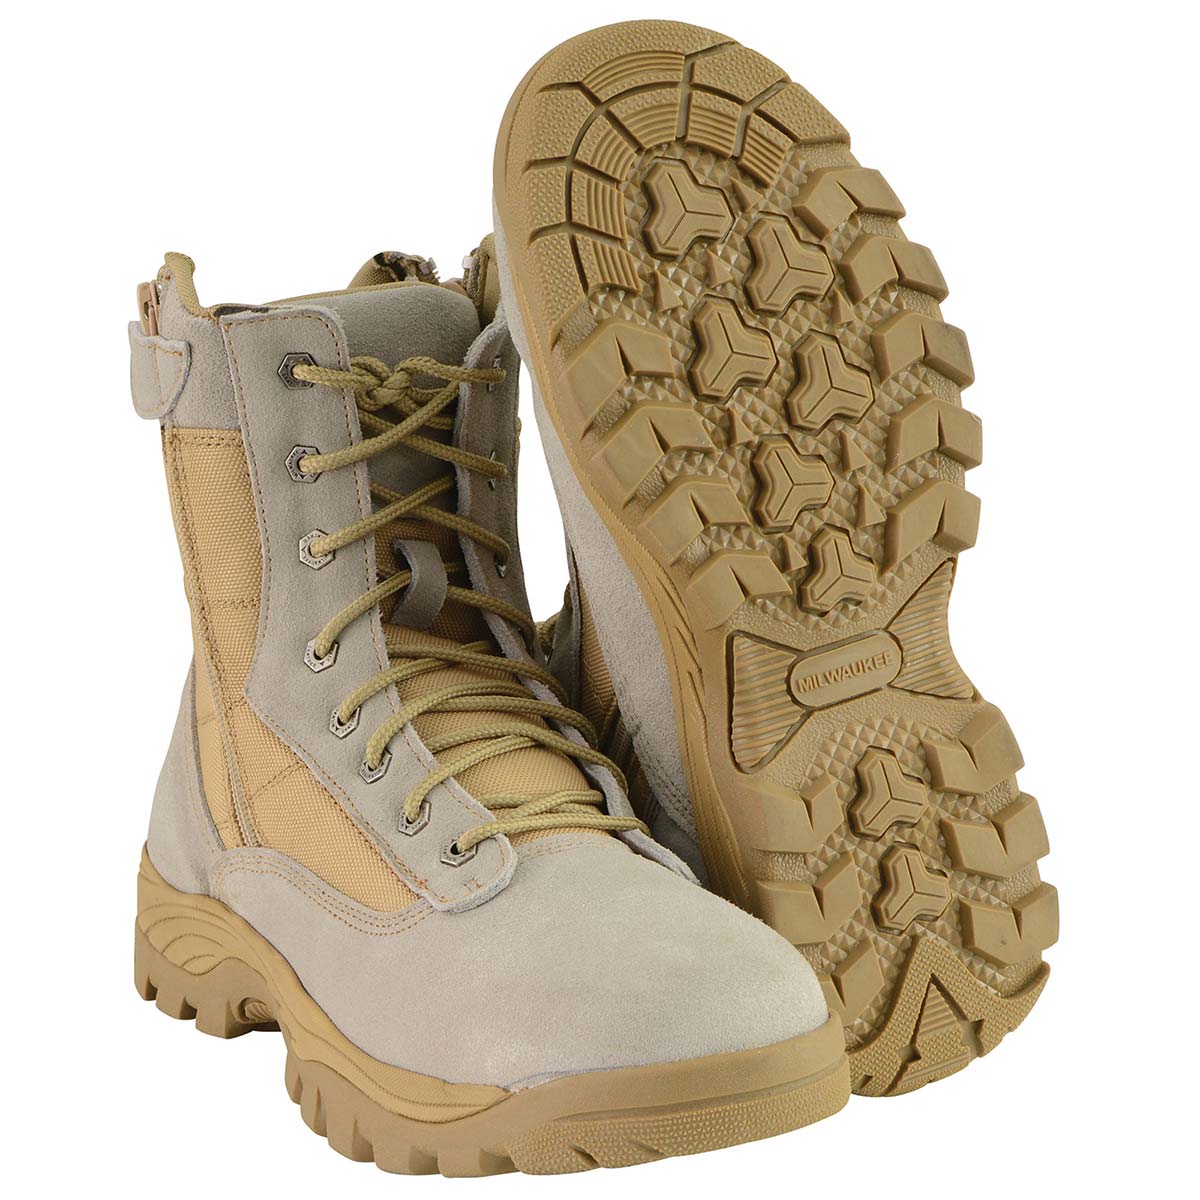 Milwaukee Leather MBM9111 Men's Lace-Up Desert Sand 9-Inch Leather Swat Style-Tactical Motorcycle Biker Boots